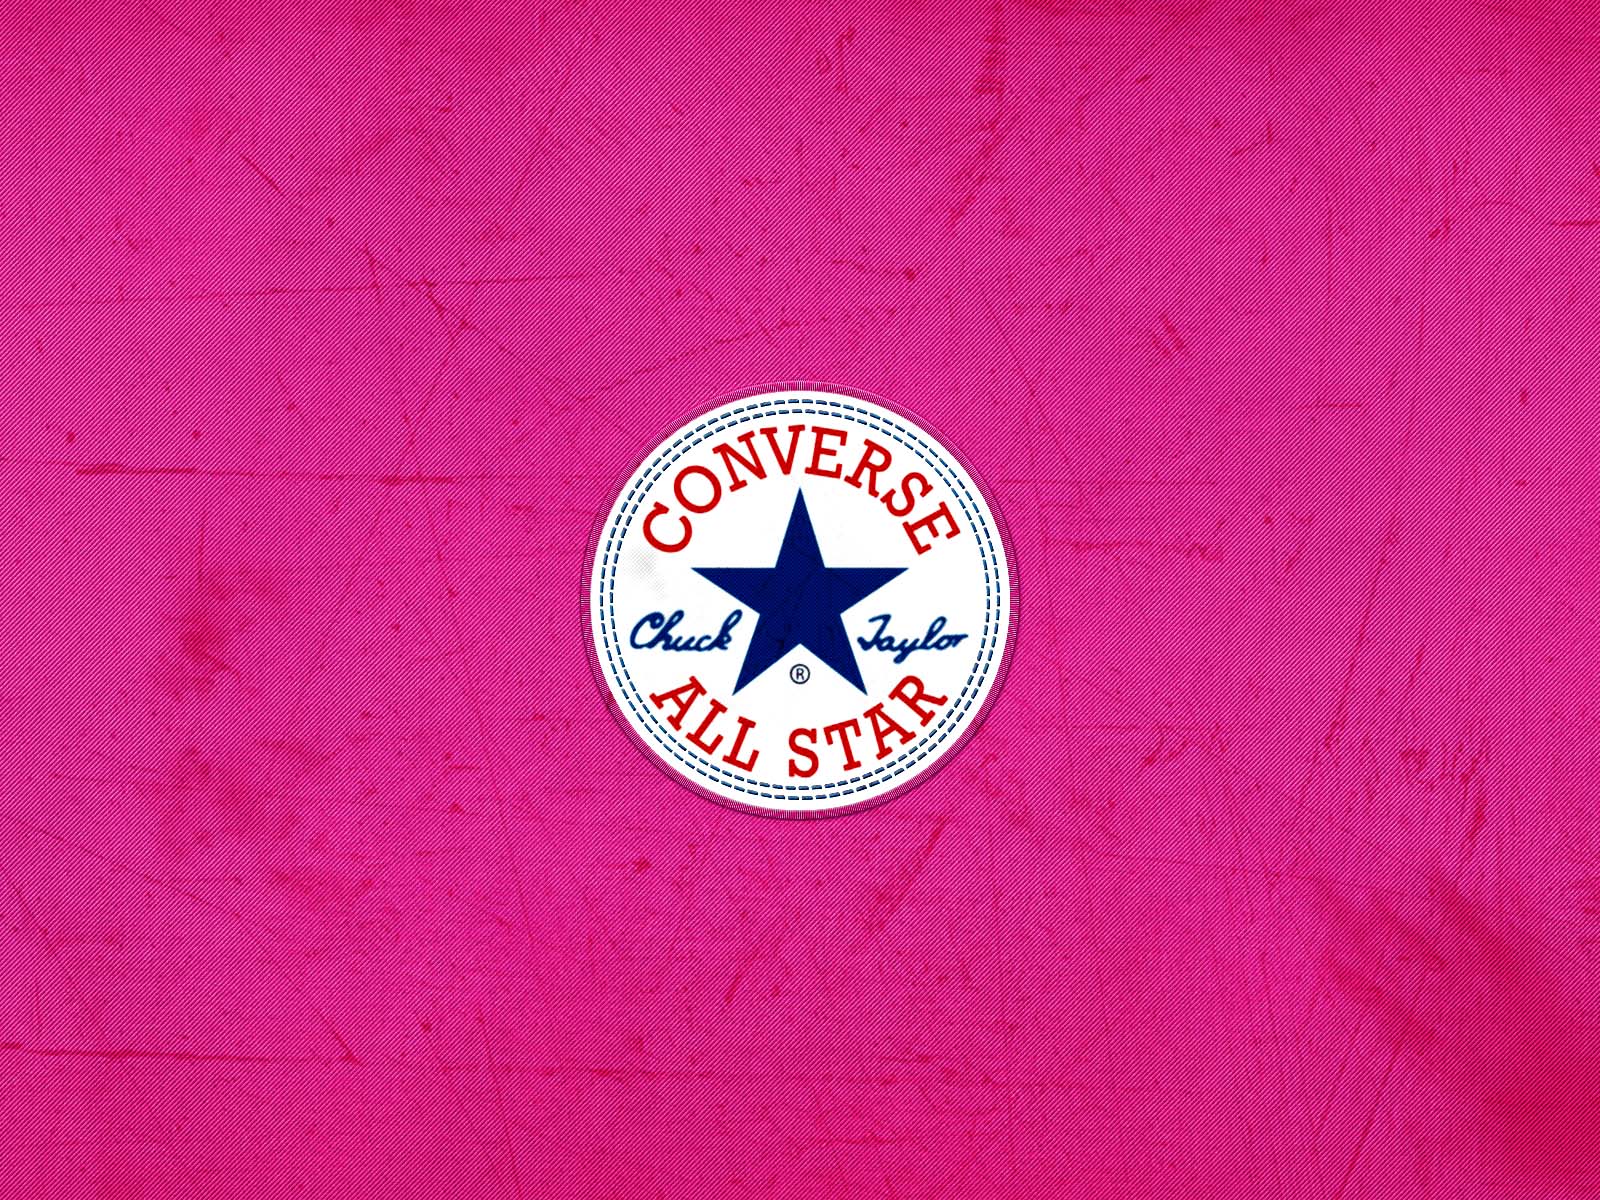 Converse All Star HD Logo Wallpapers HD Wallpapers 